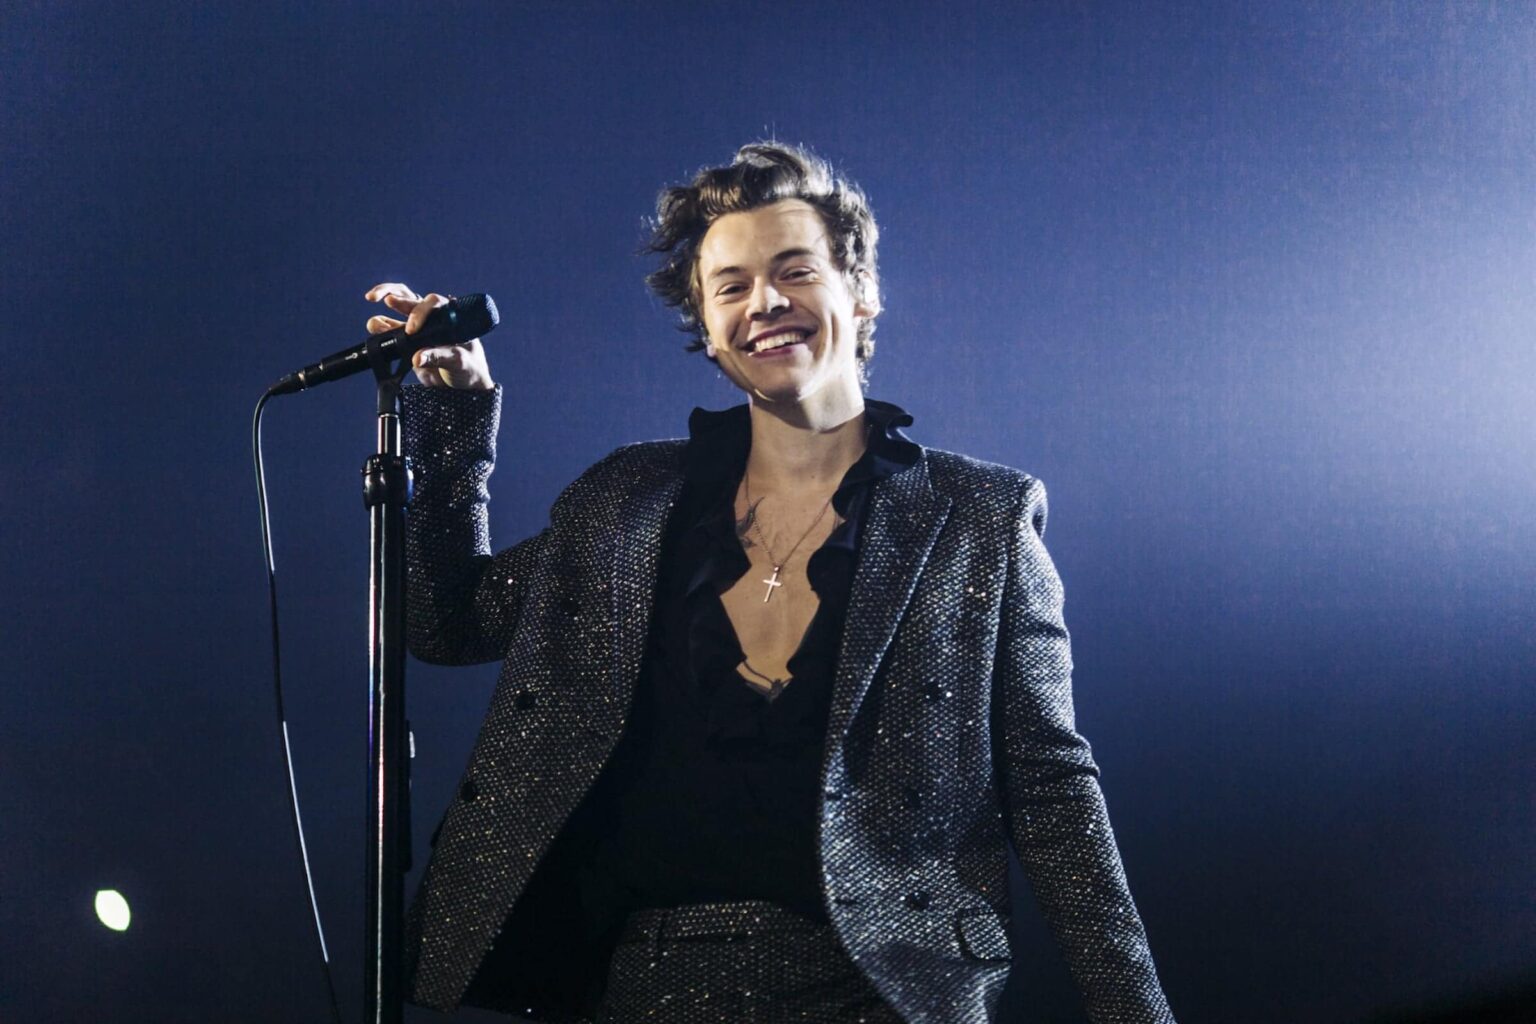 Finally, Harry Styles has confirmed the not-so-subtle sexual meaning behind 'Watermelon Sugar'. Read what the singer said about the hit song while on tour.